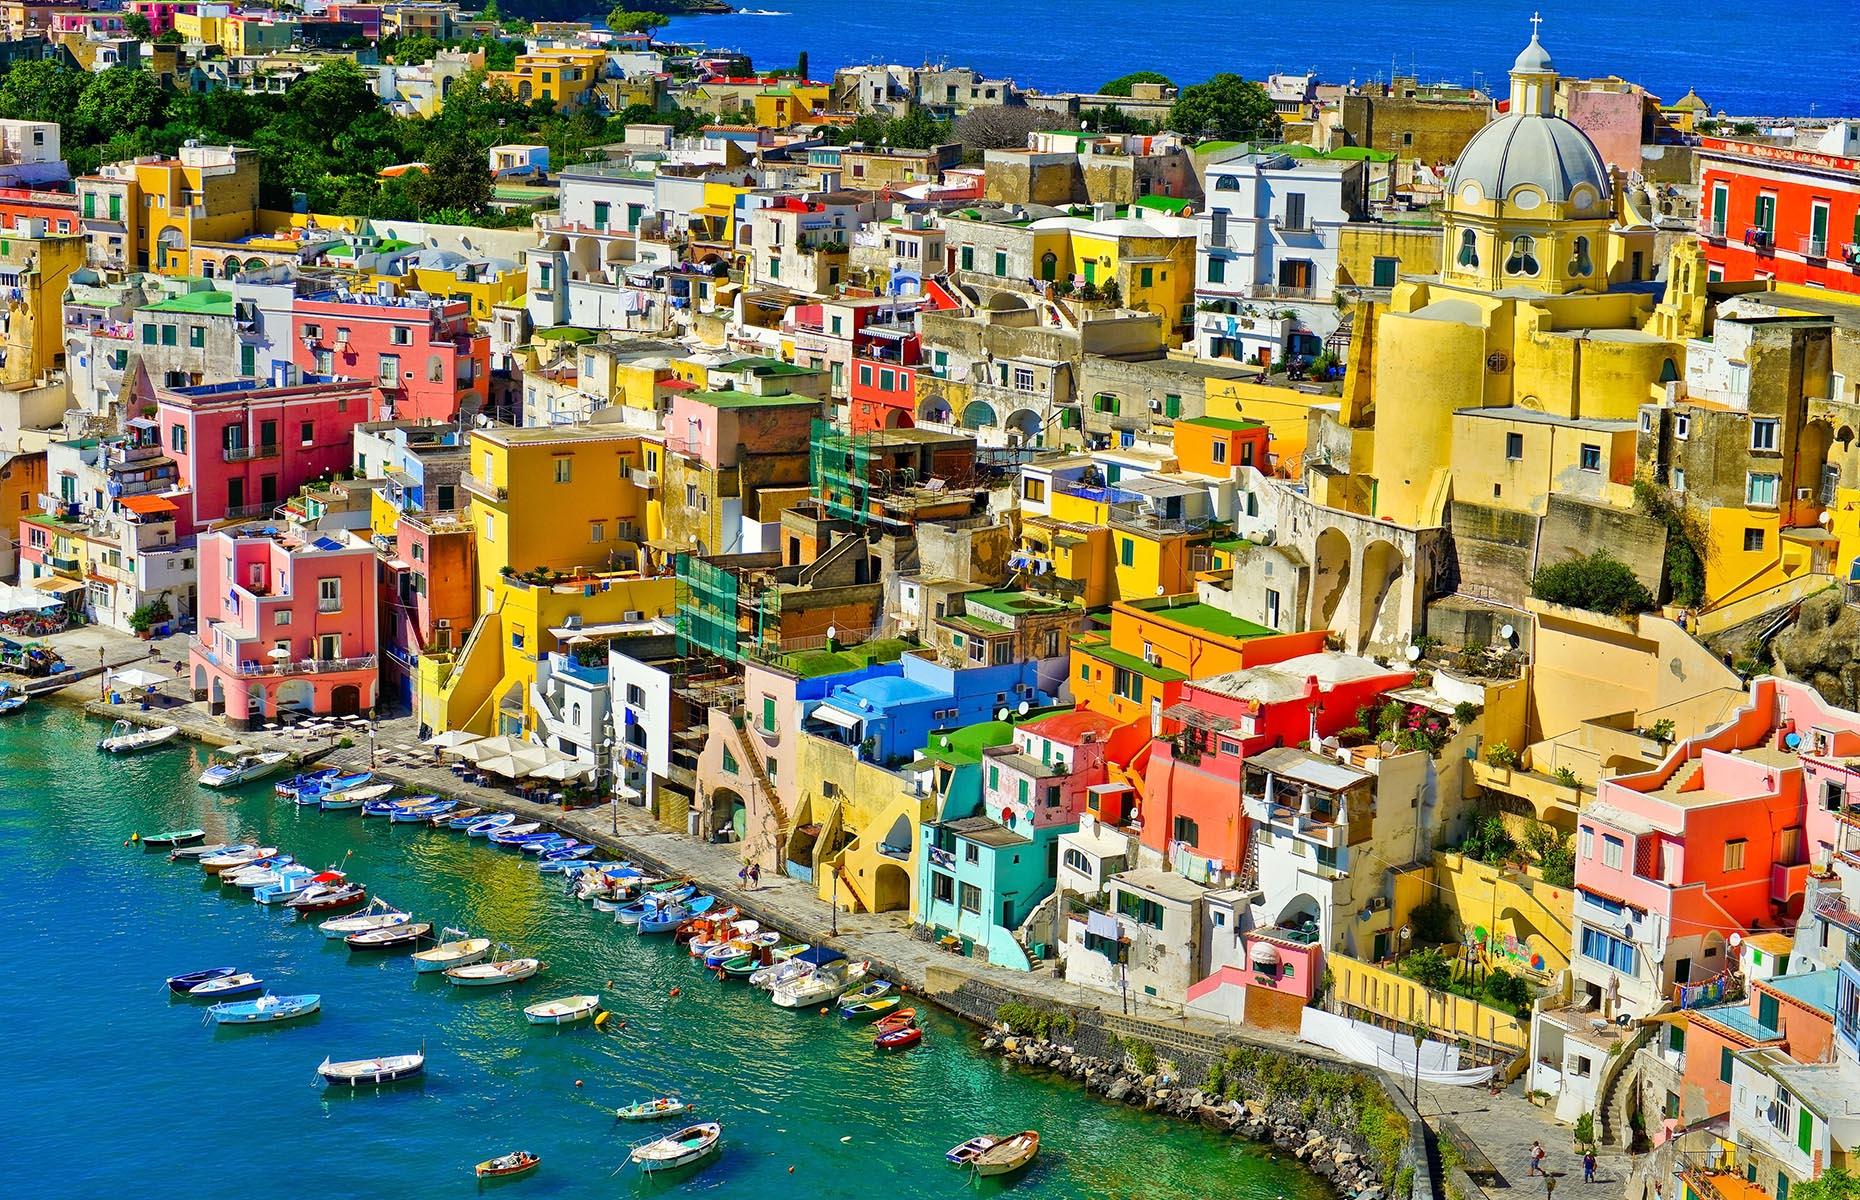 Slide 2 of 41: The town of Procida spans the whole island from which it gets its name. It’s the Bay of Naples’ smallest and sweetest island, much quieter than neighboring islands, such as Capri. Littering the seaside are houses drenched in dazzling shades of pink, blue, yellow and more, their peeling paintwork adding to the effortless Italian charm.